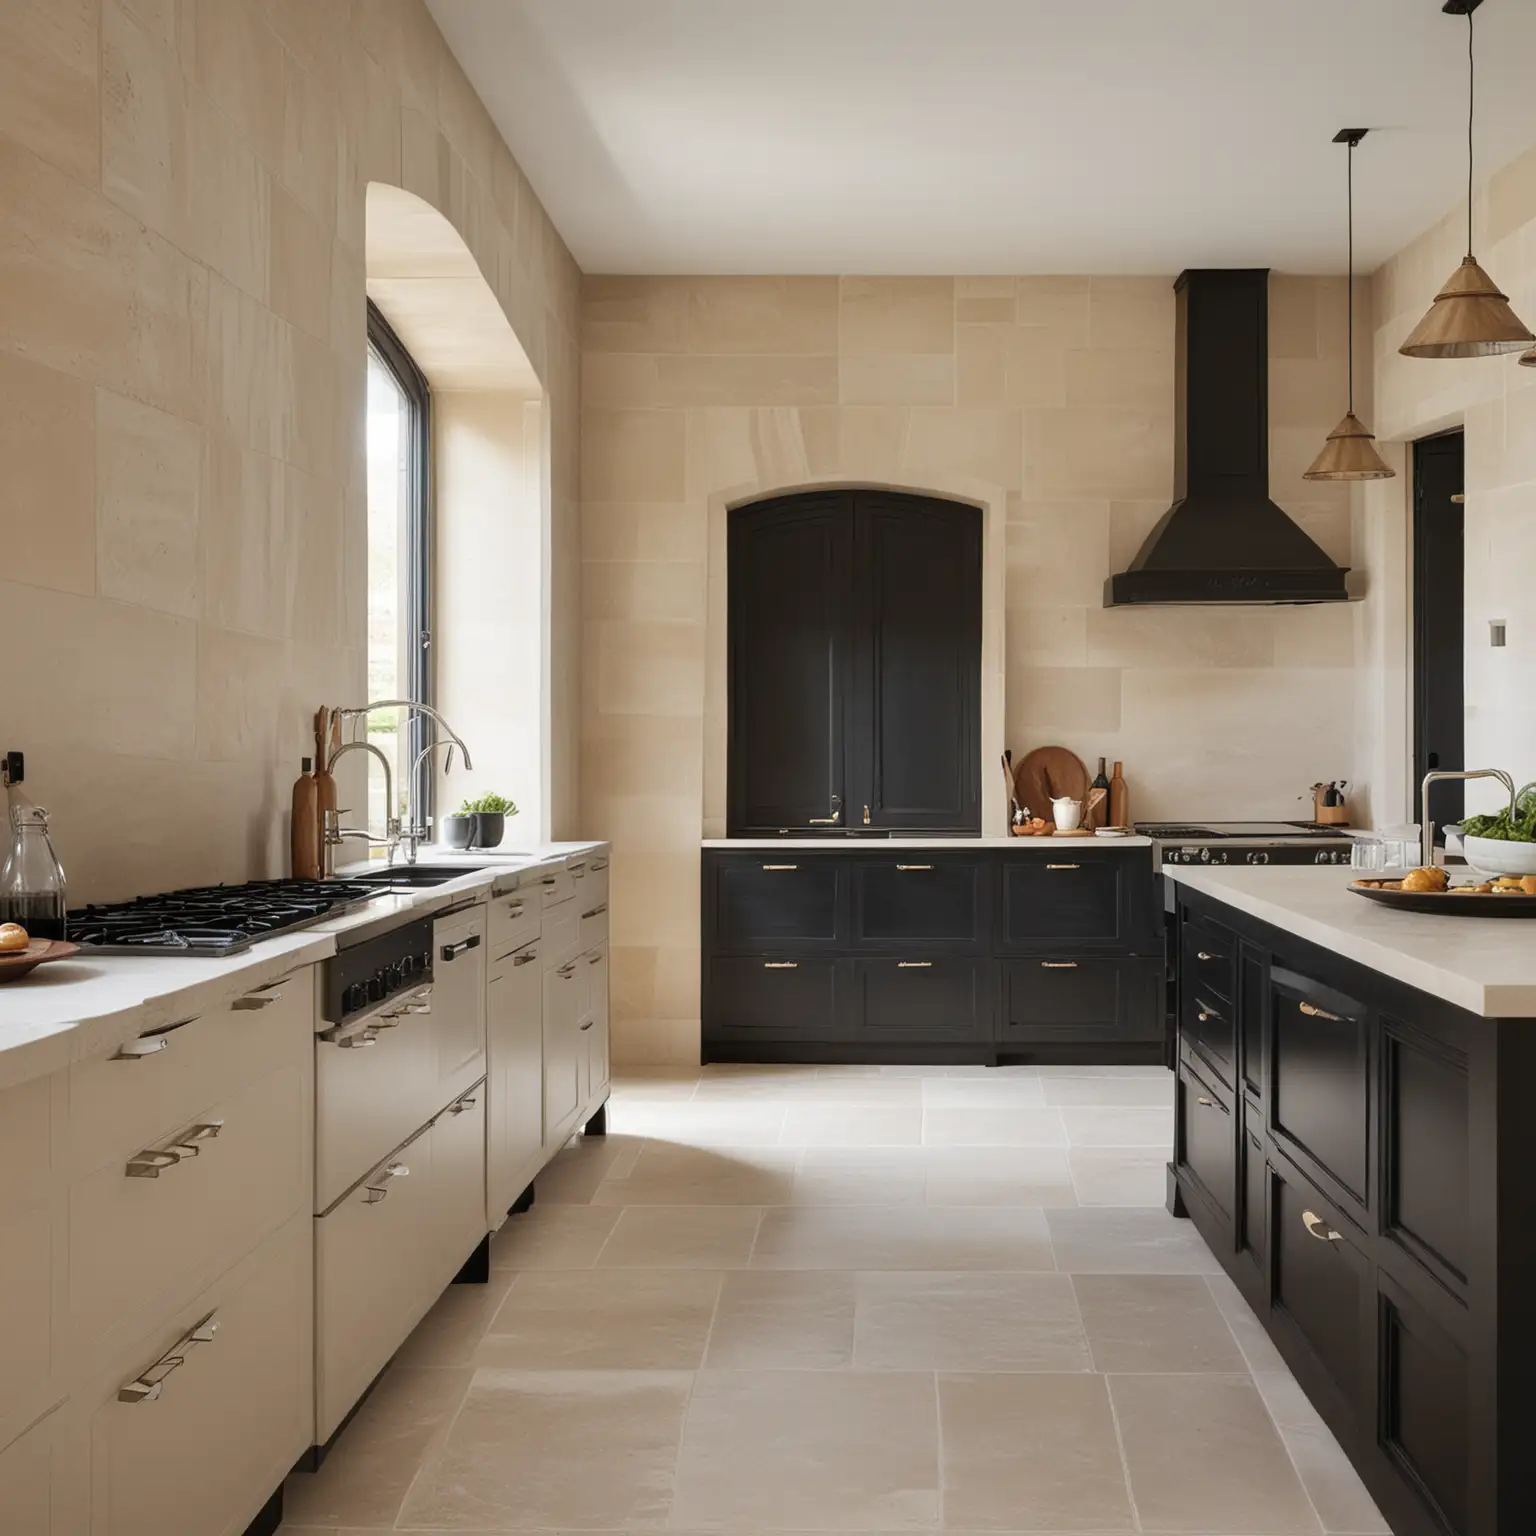 Modern French Chateau Home Kitchen with Rendered Walls in Beige and Black